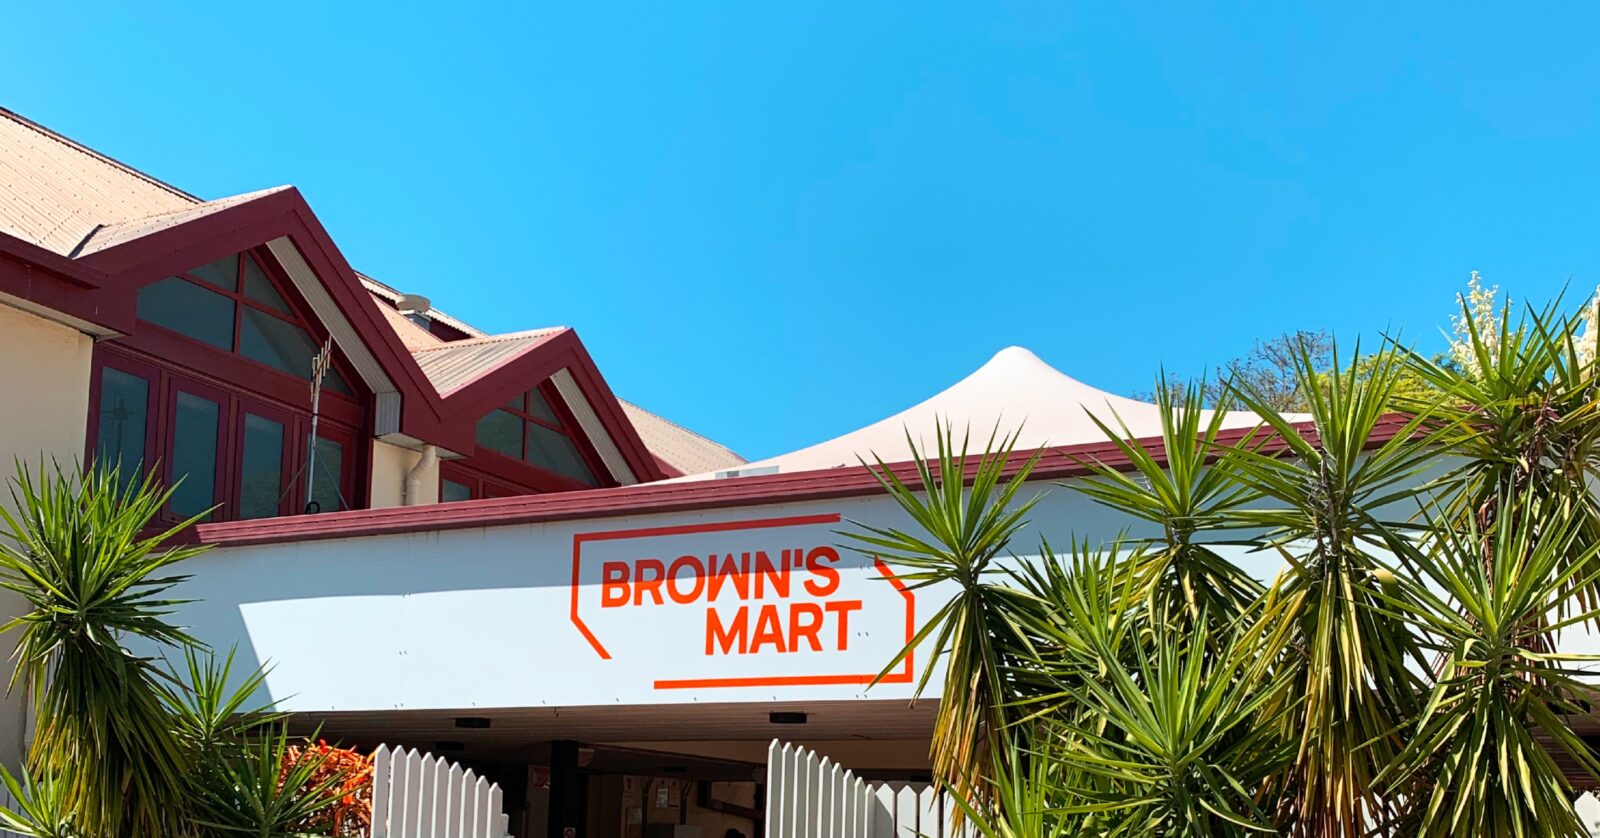 Front of the venue showing the Brown's Mart sign